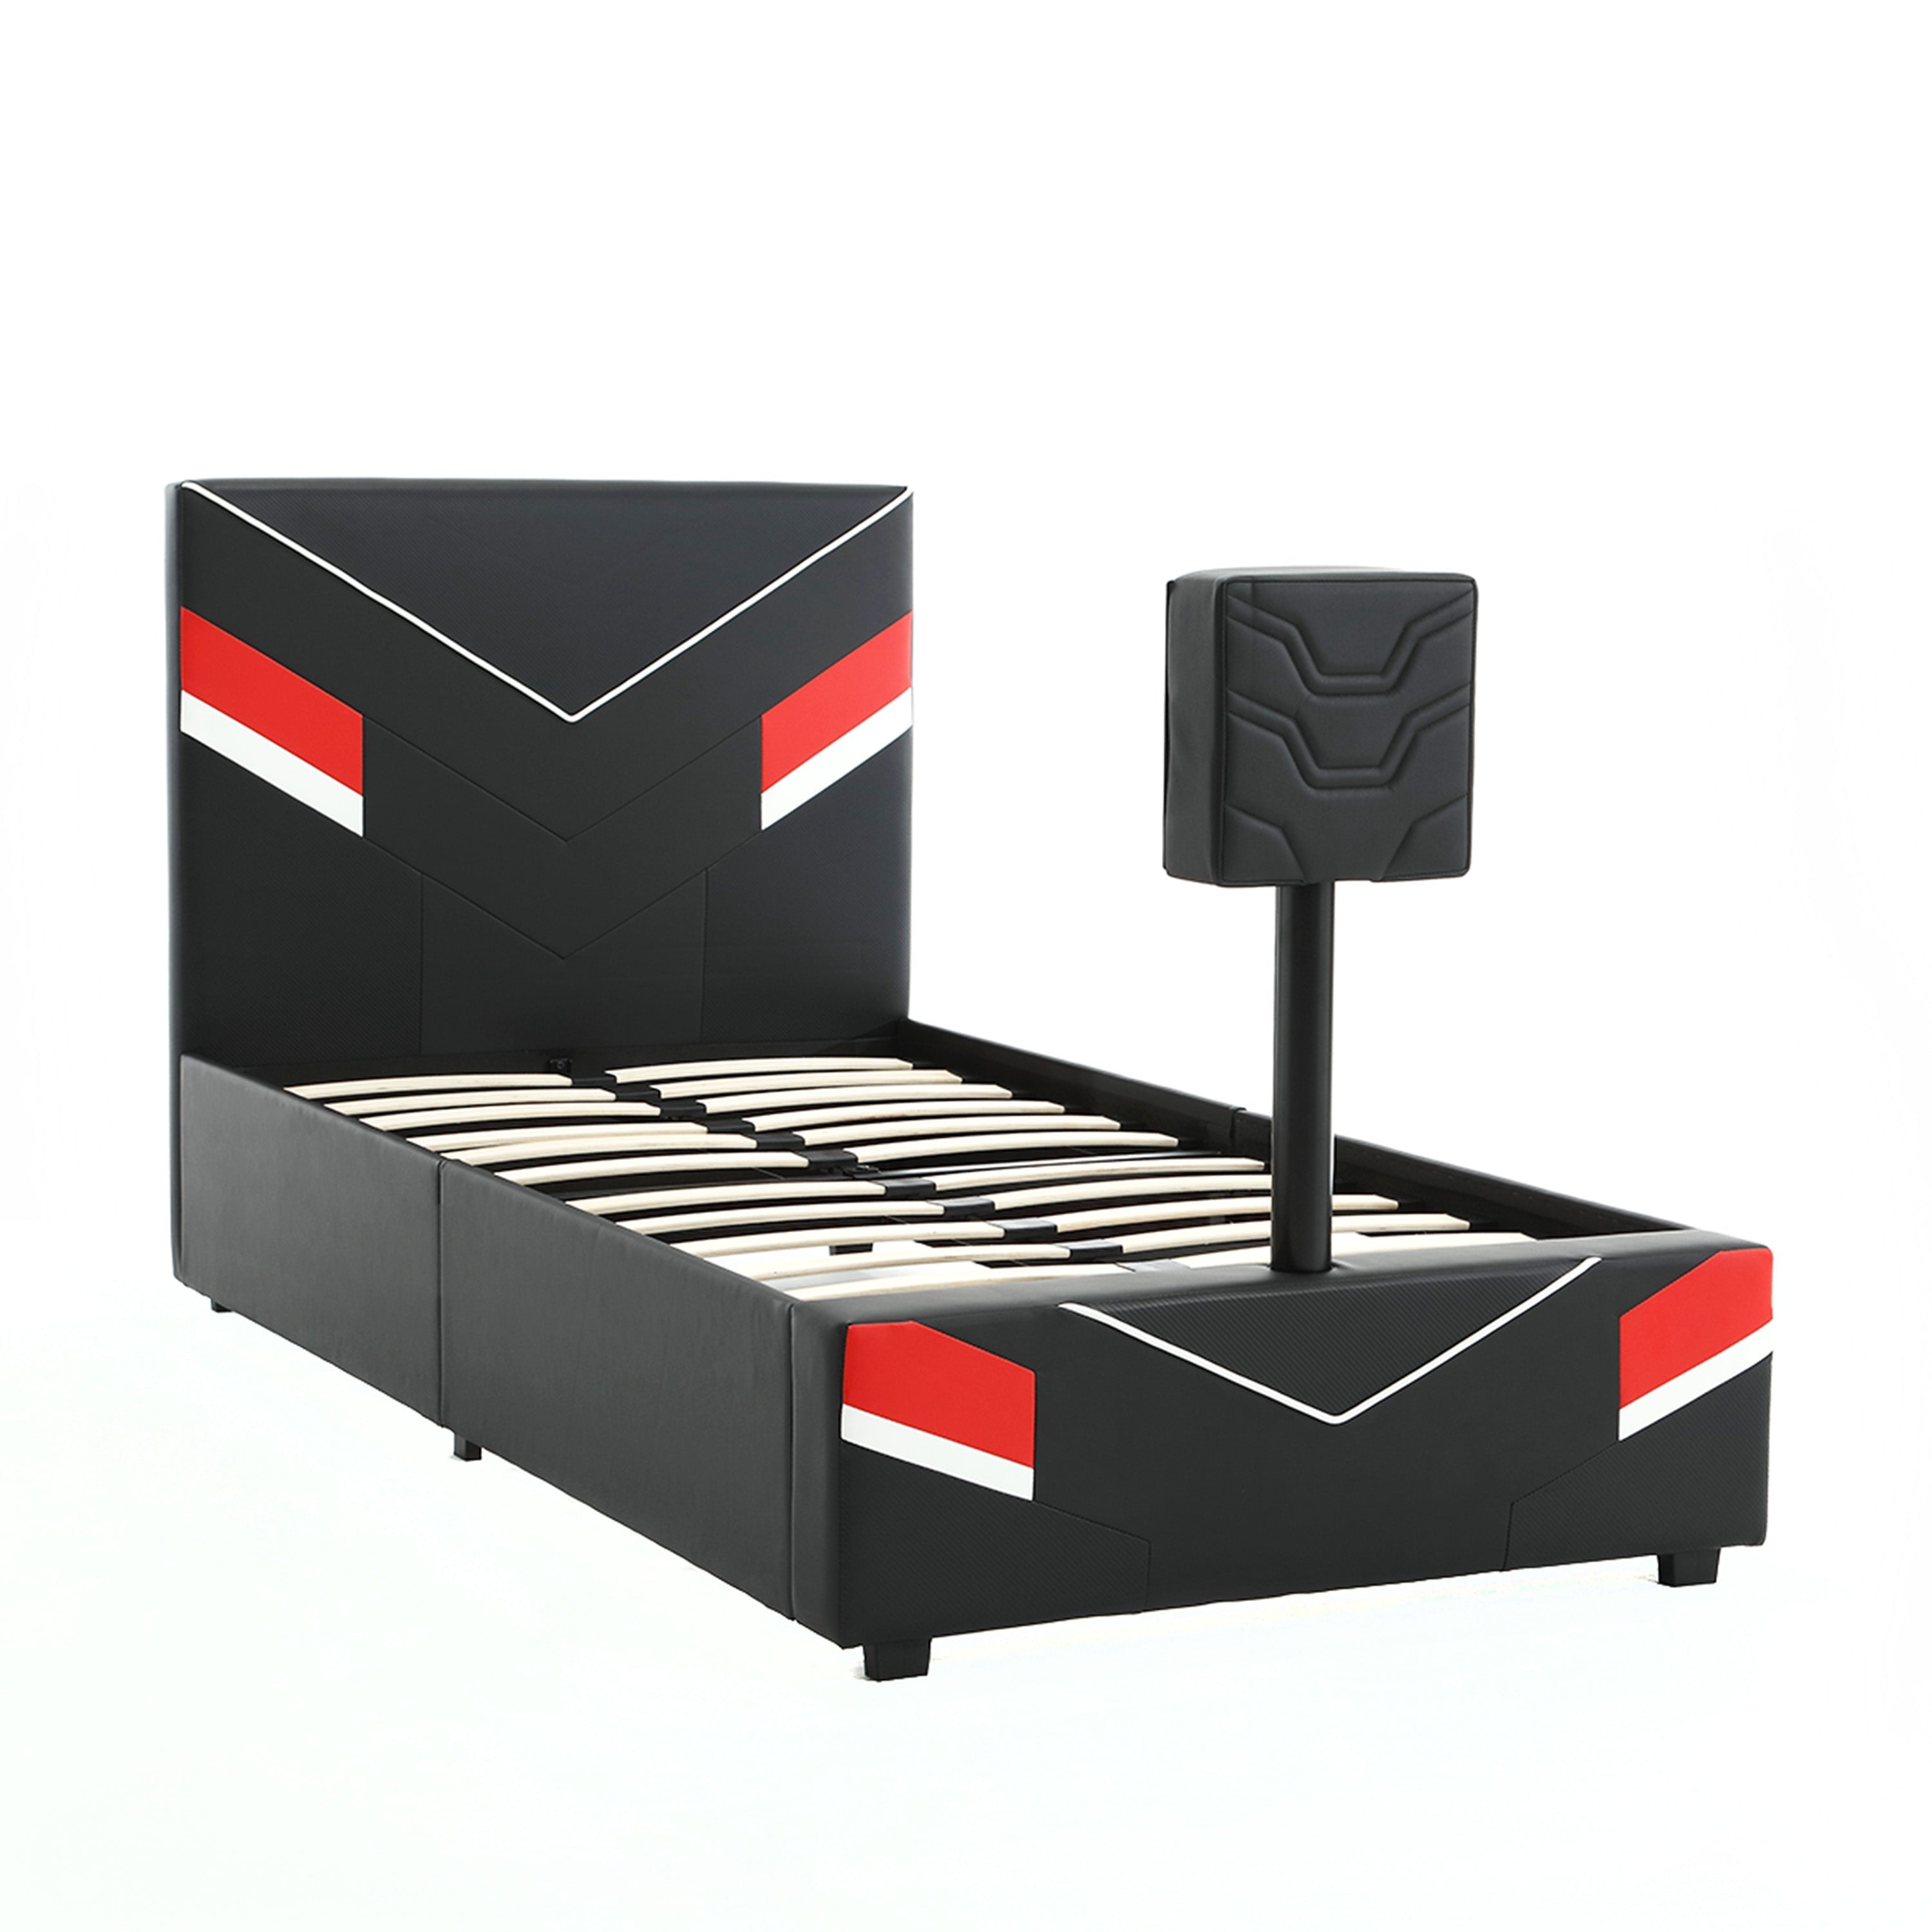 Orion eSports Gaming Bed Frame with TV Mount, Black/Red, Twin